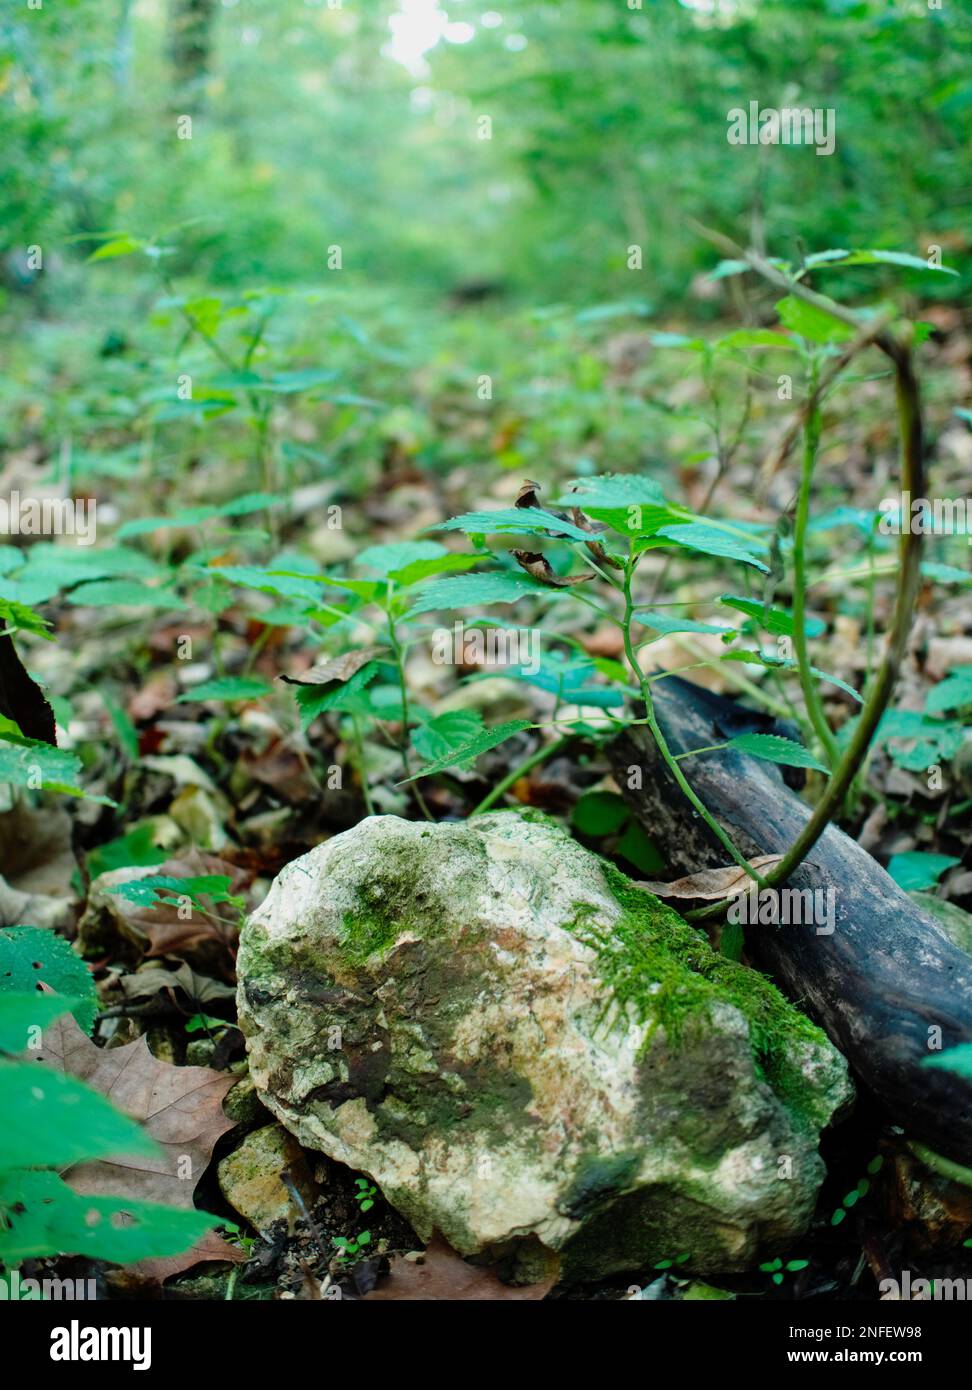 A lush green plant with long, winding stems is growing atop a large rock situated in a wooded area Stock Photo